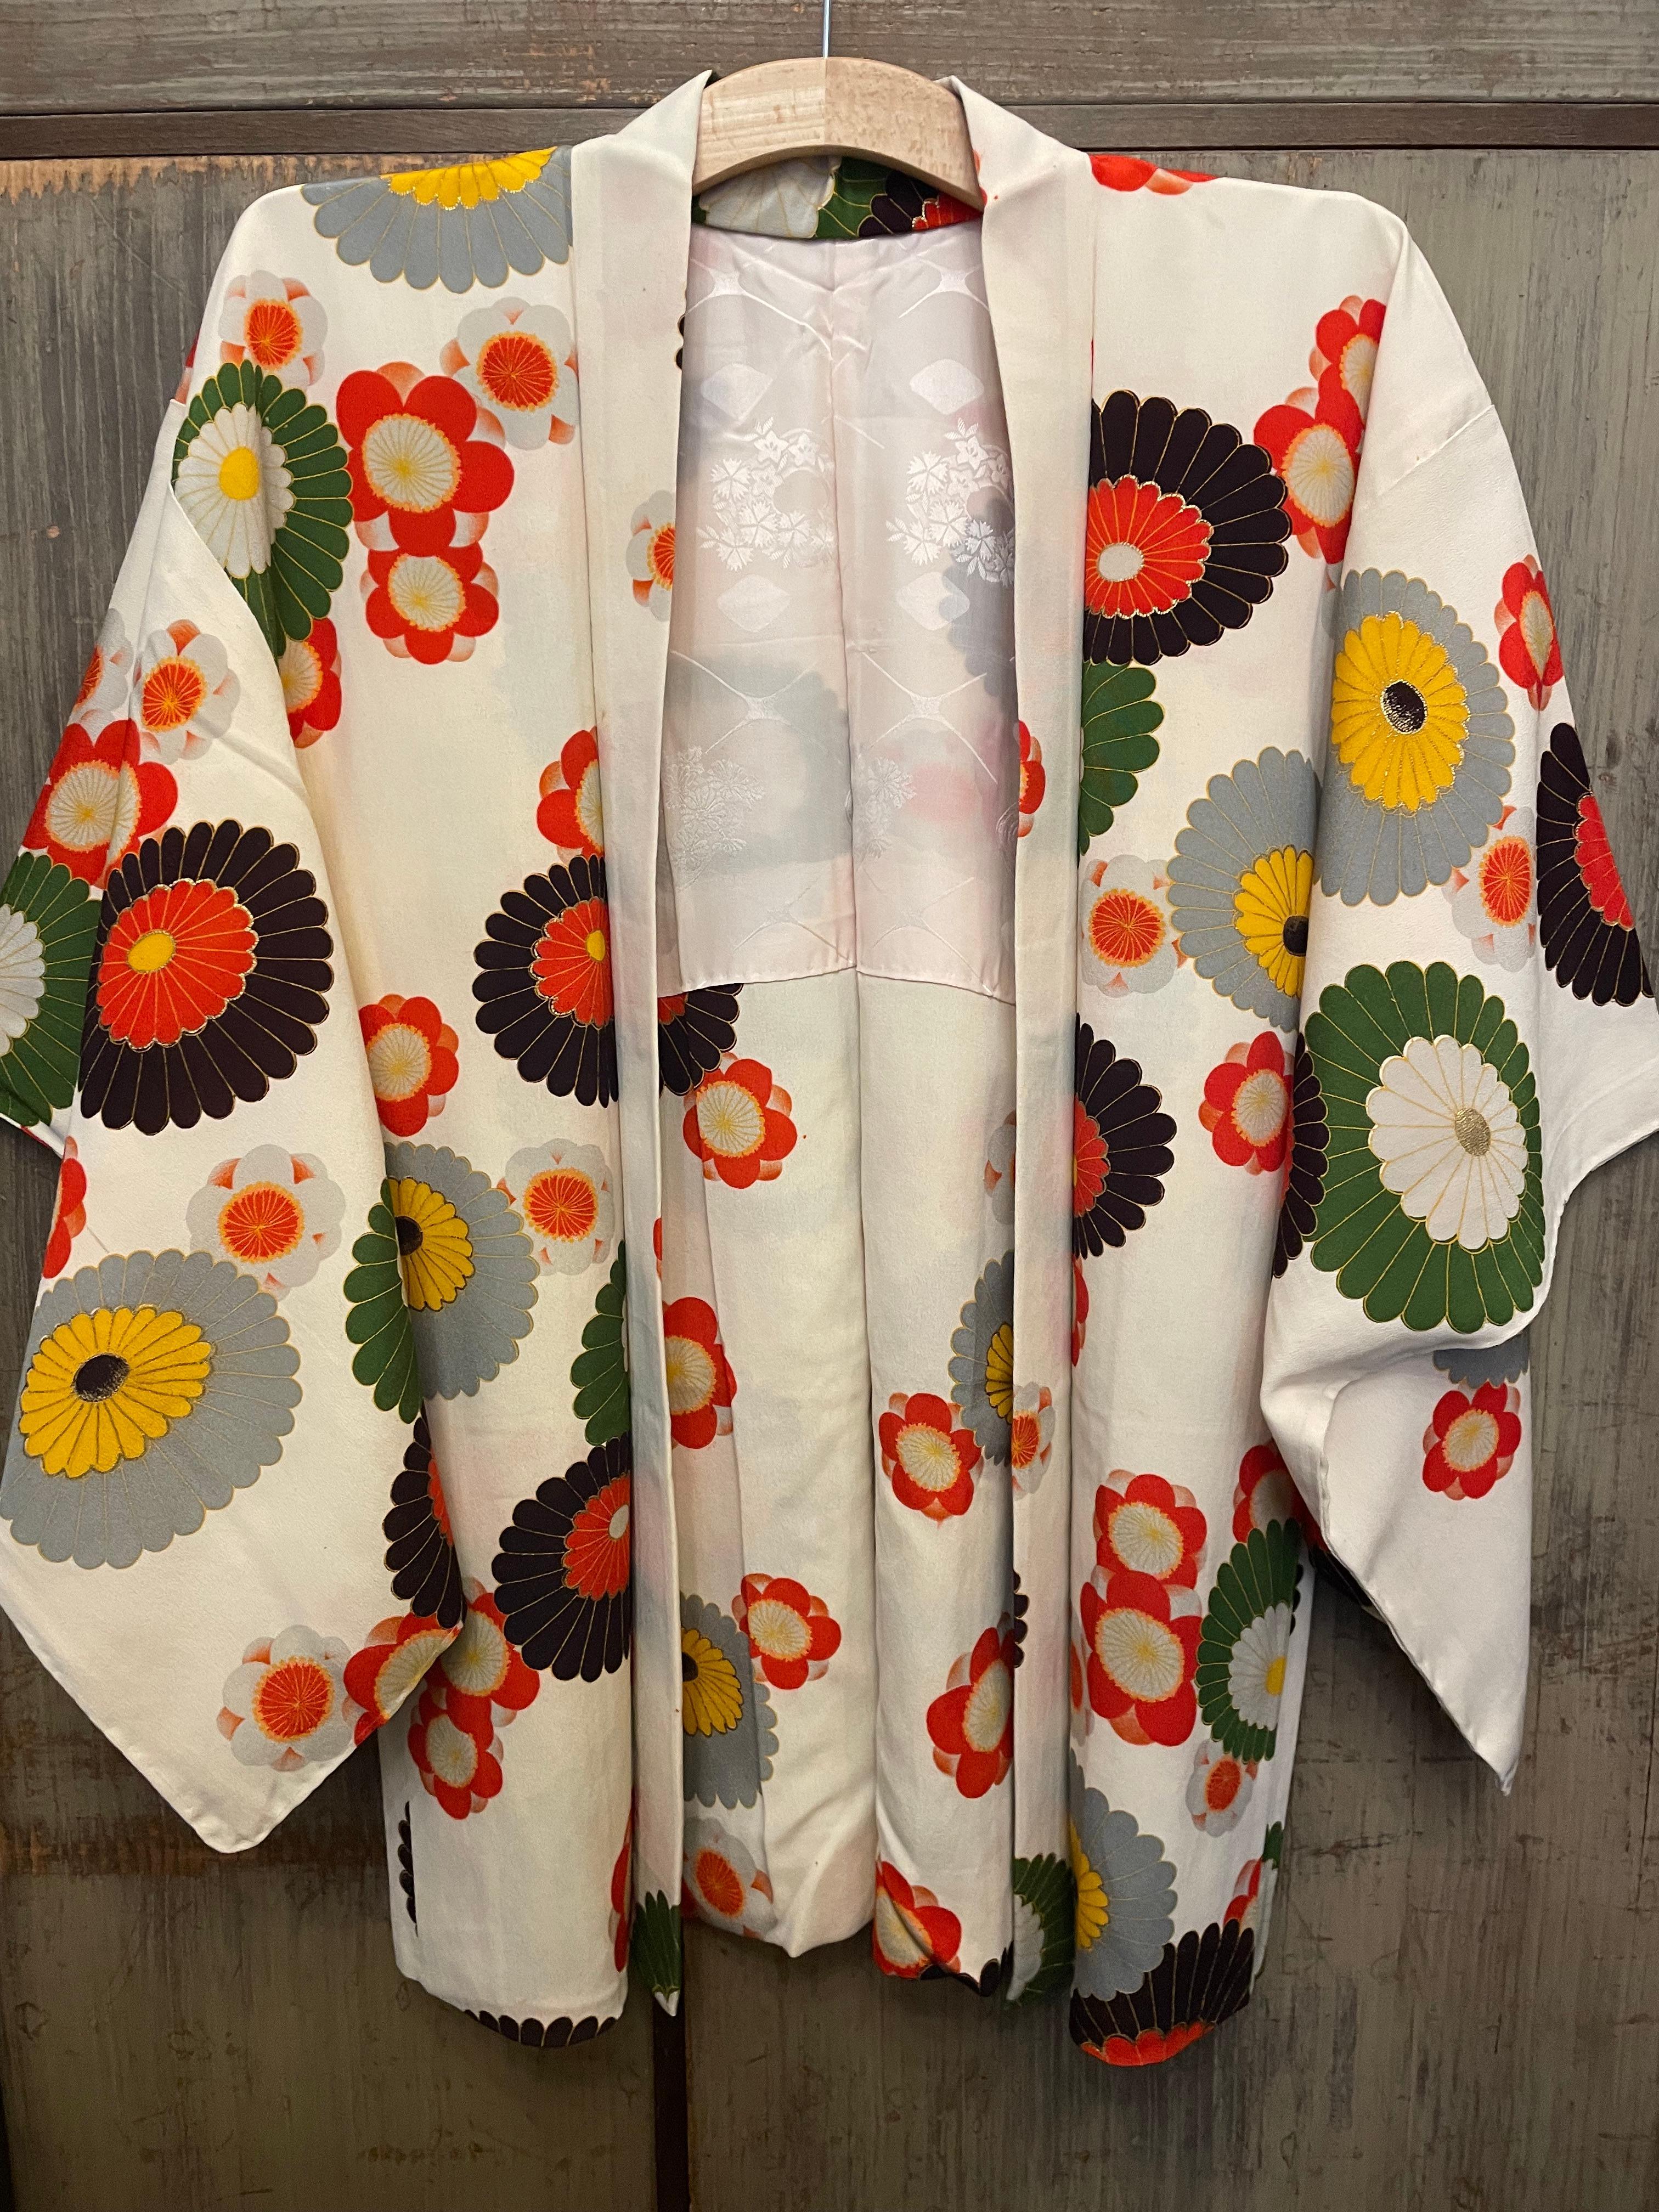 This is a silk jacket which was made in Japan.
It was made in Showa era around 1980s.

The haori is a traditional Japanese hip- or thigh-length jacket worn over a kimono. Resembling a shortened kimono with no overlapping front panels (okumi), the